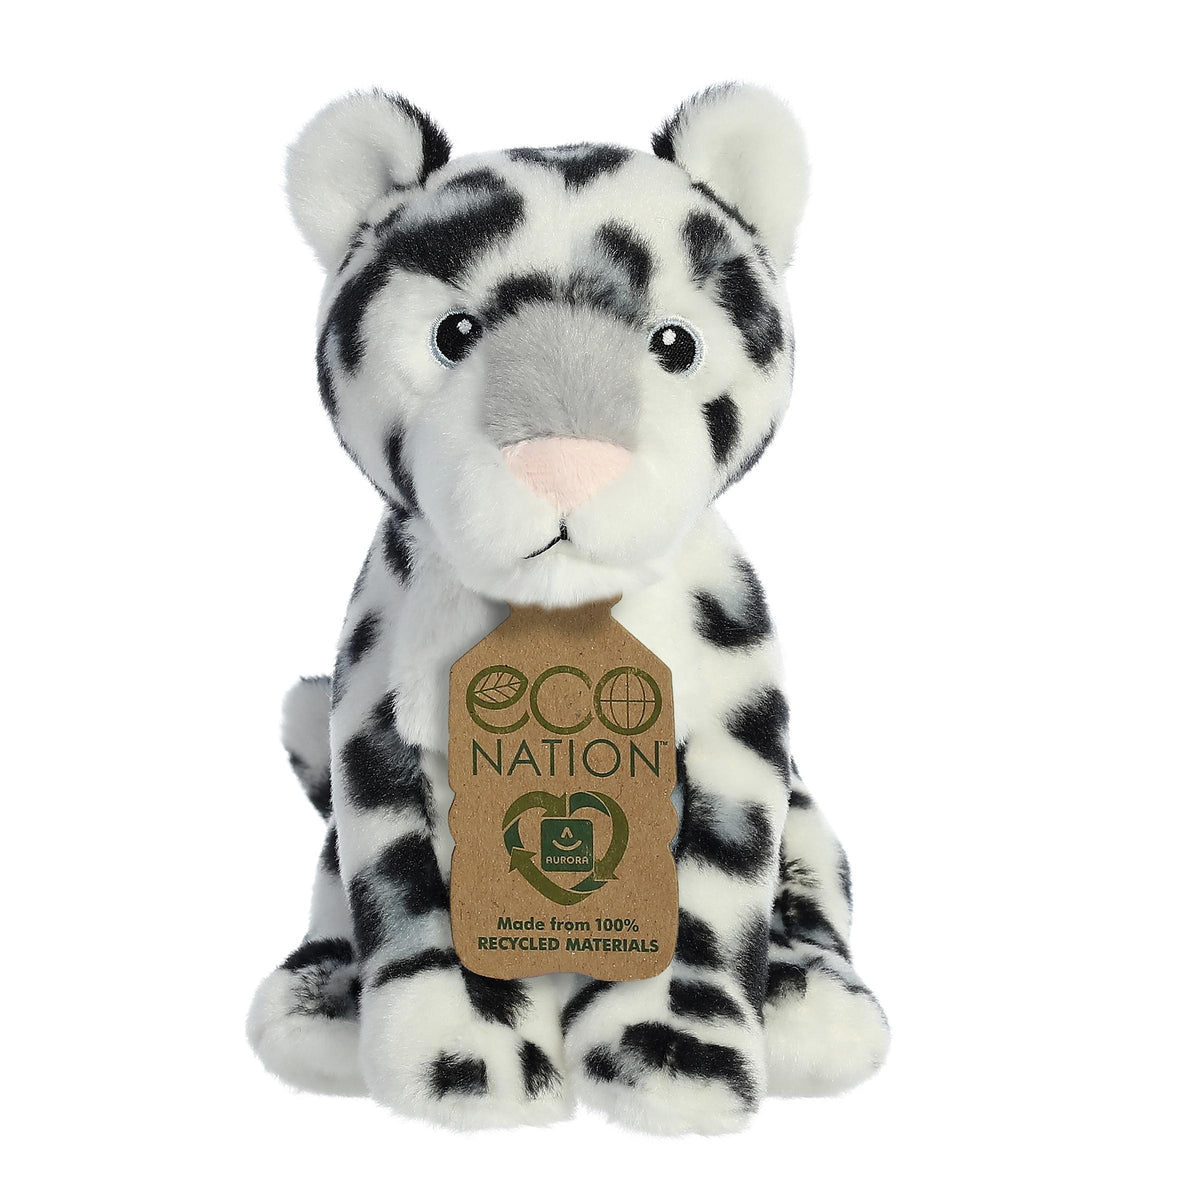 Magical snow leopard plush with a white coat and black spots, cute embroidered eyes, and an eco-nation tag